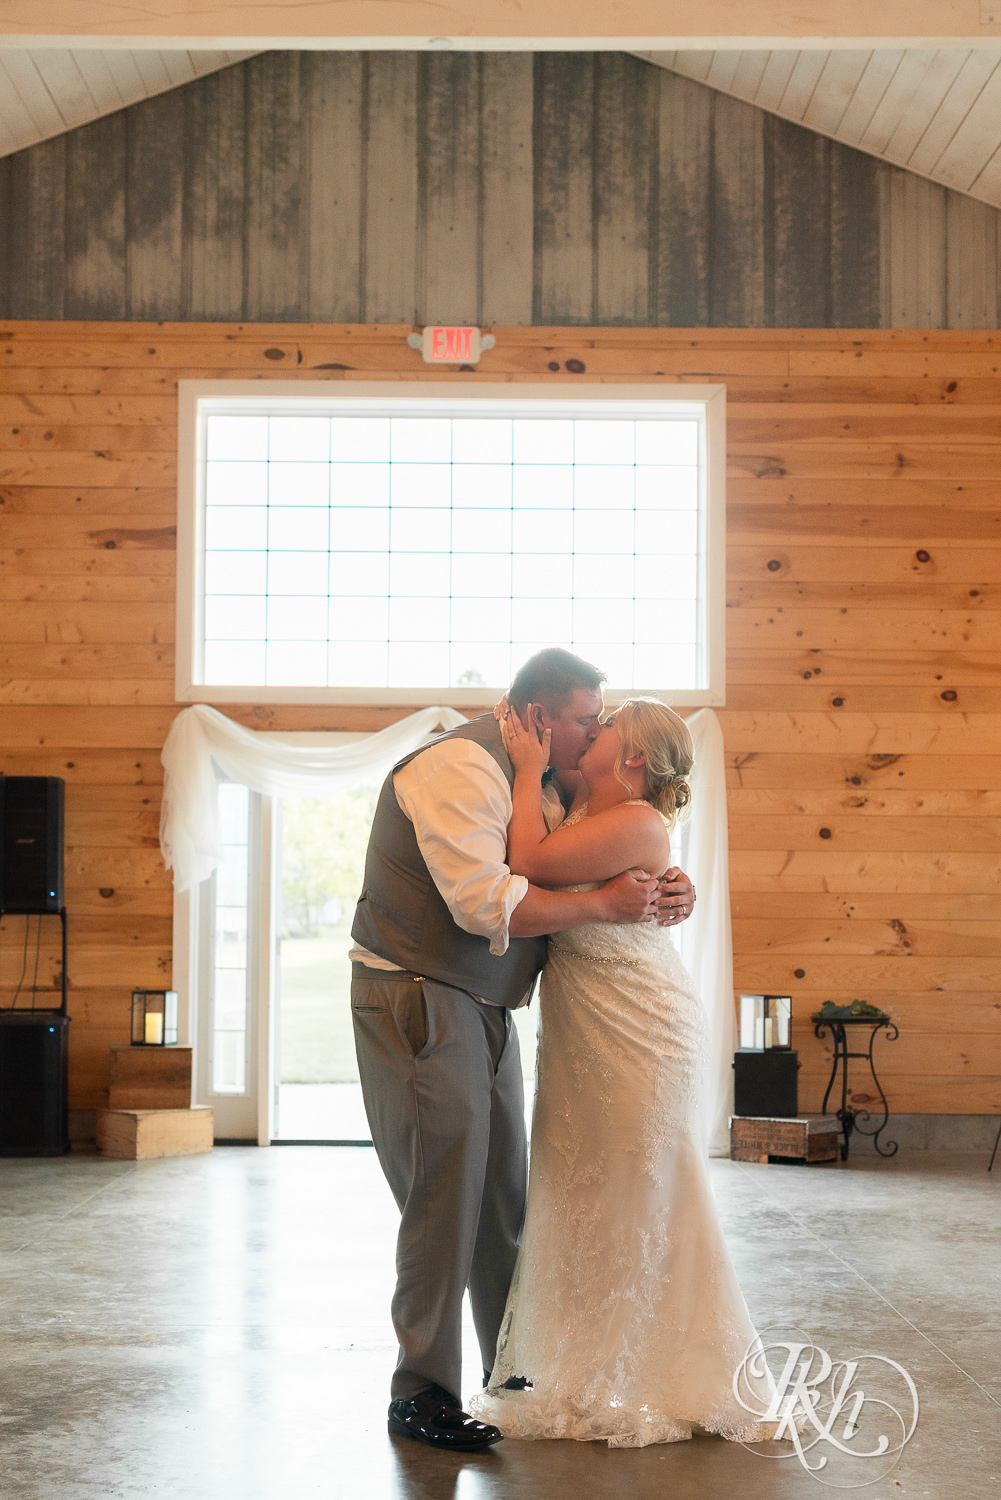 Bride and groom share first dance at Barn at Mirror Lake in Mondovi, Wisconsin.